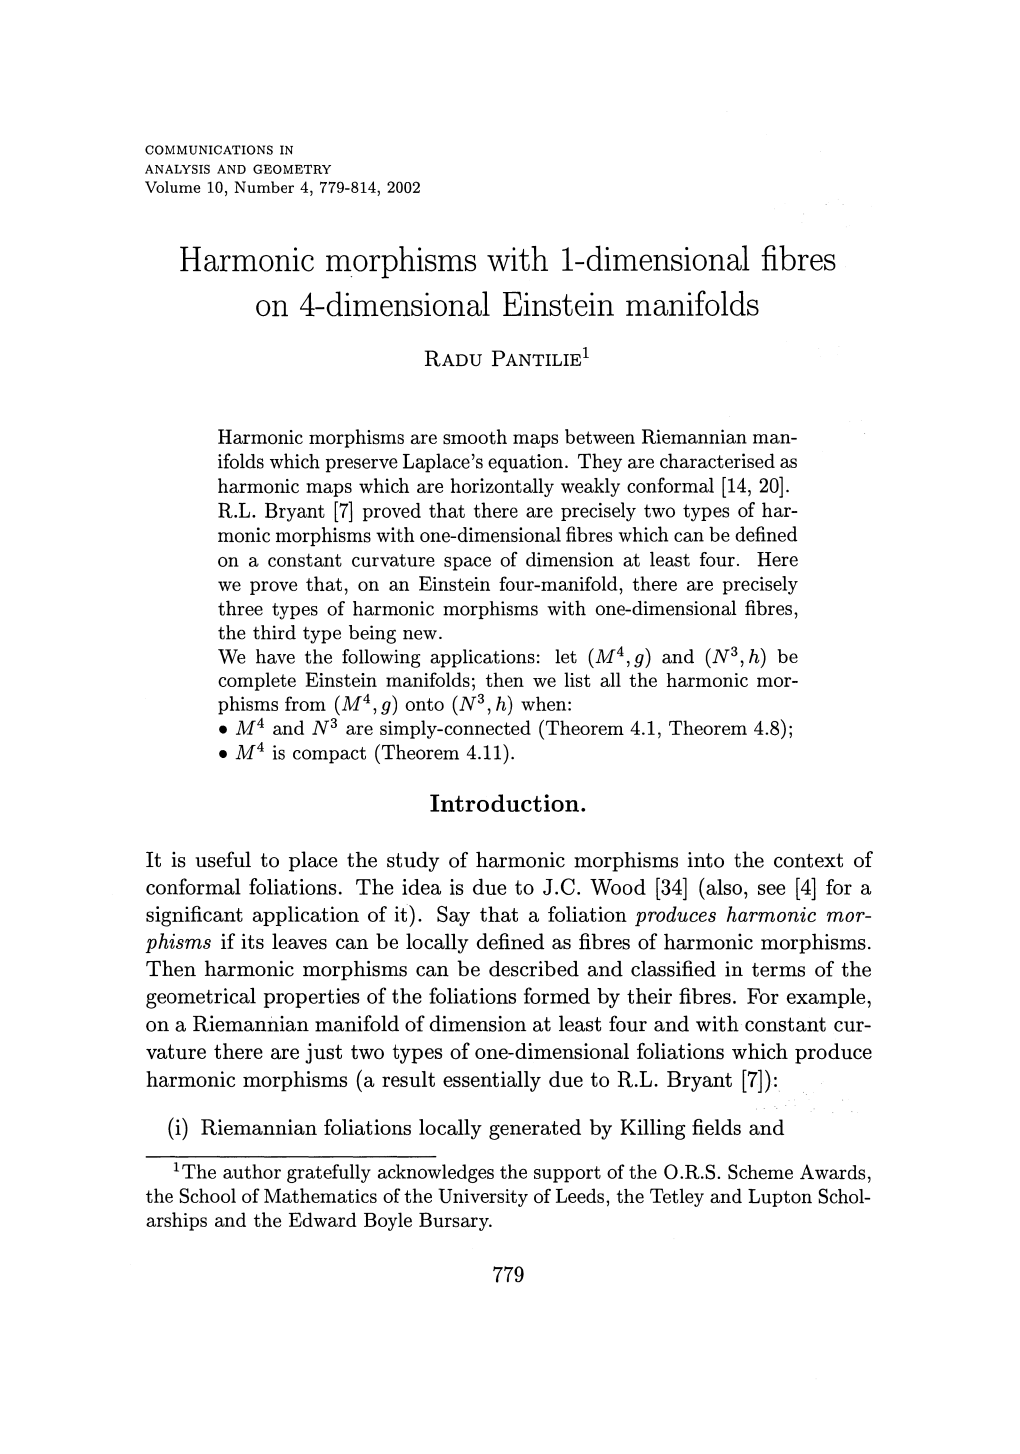 Harmonic Morphisms with 1-Dimensional Fibres on 4-Dimensional Einstein Manifolds